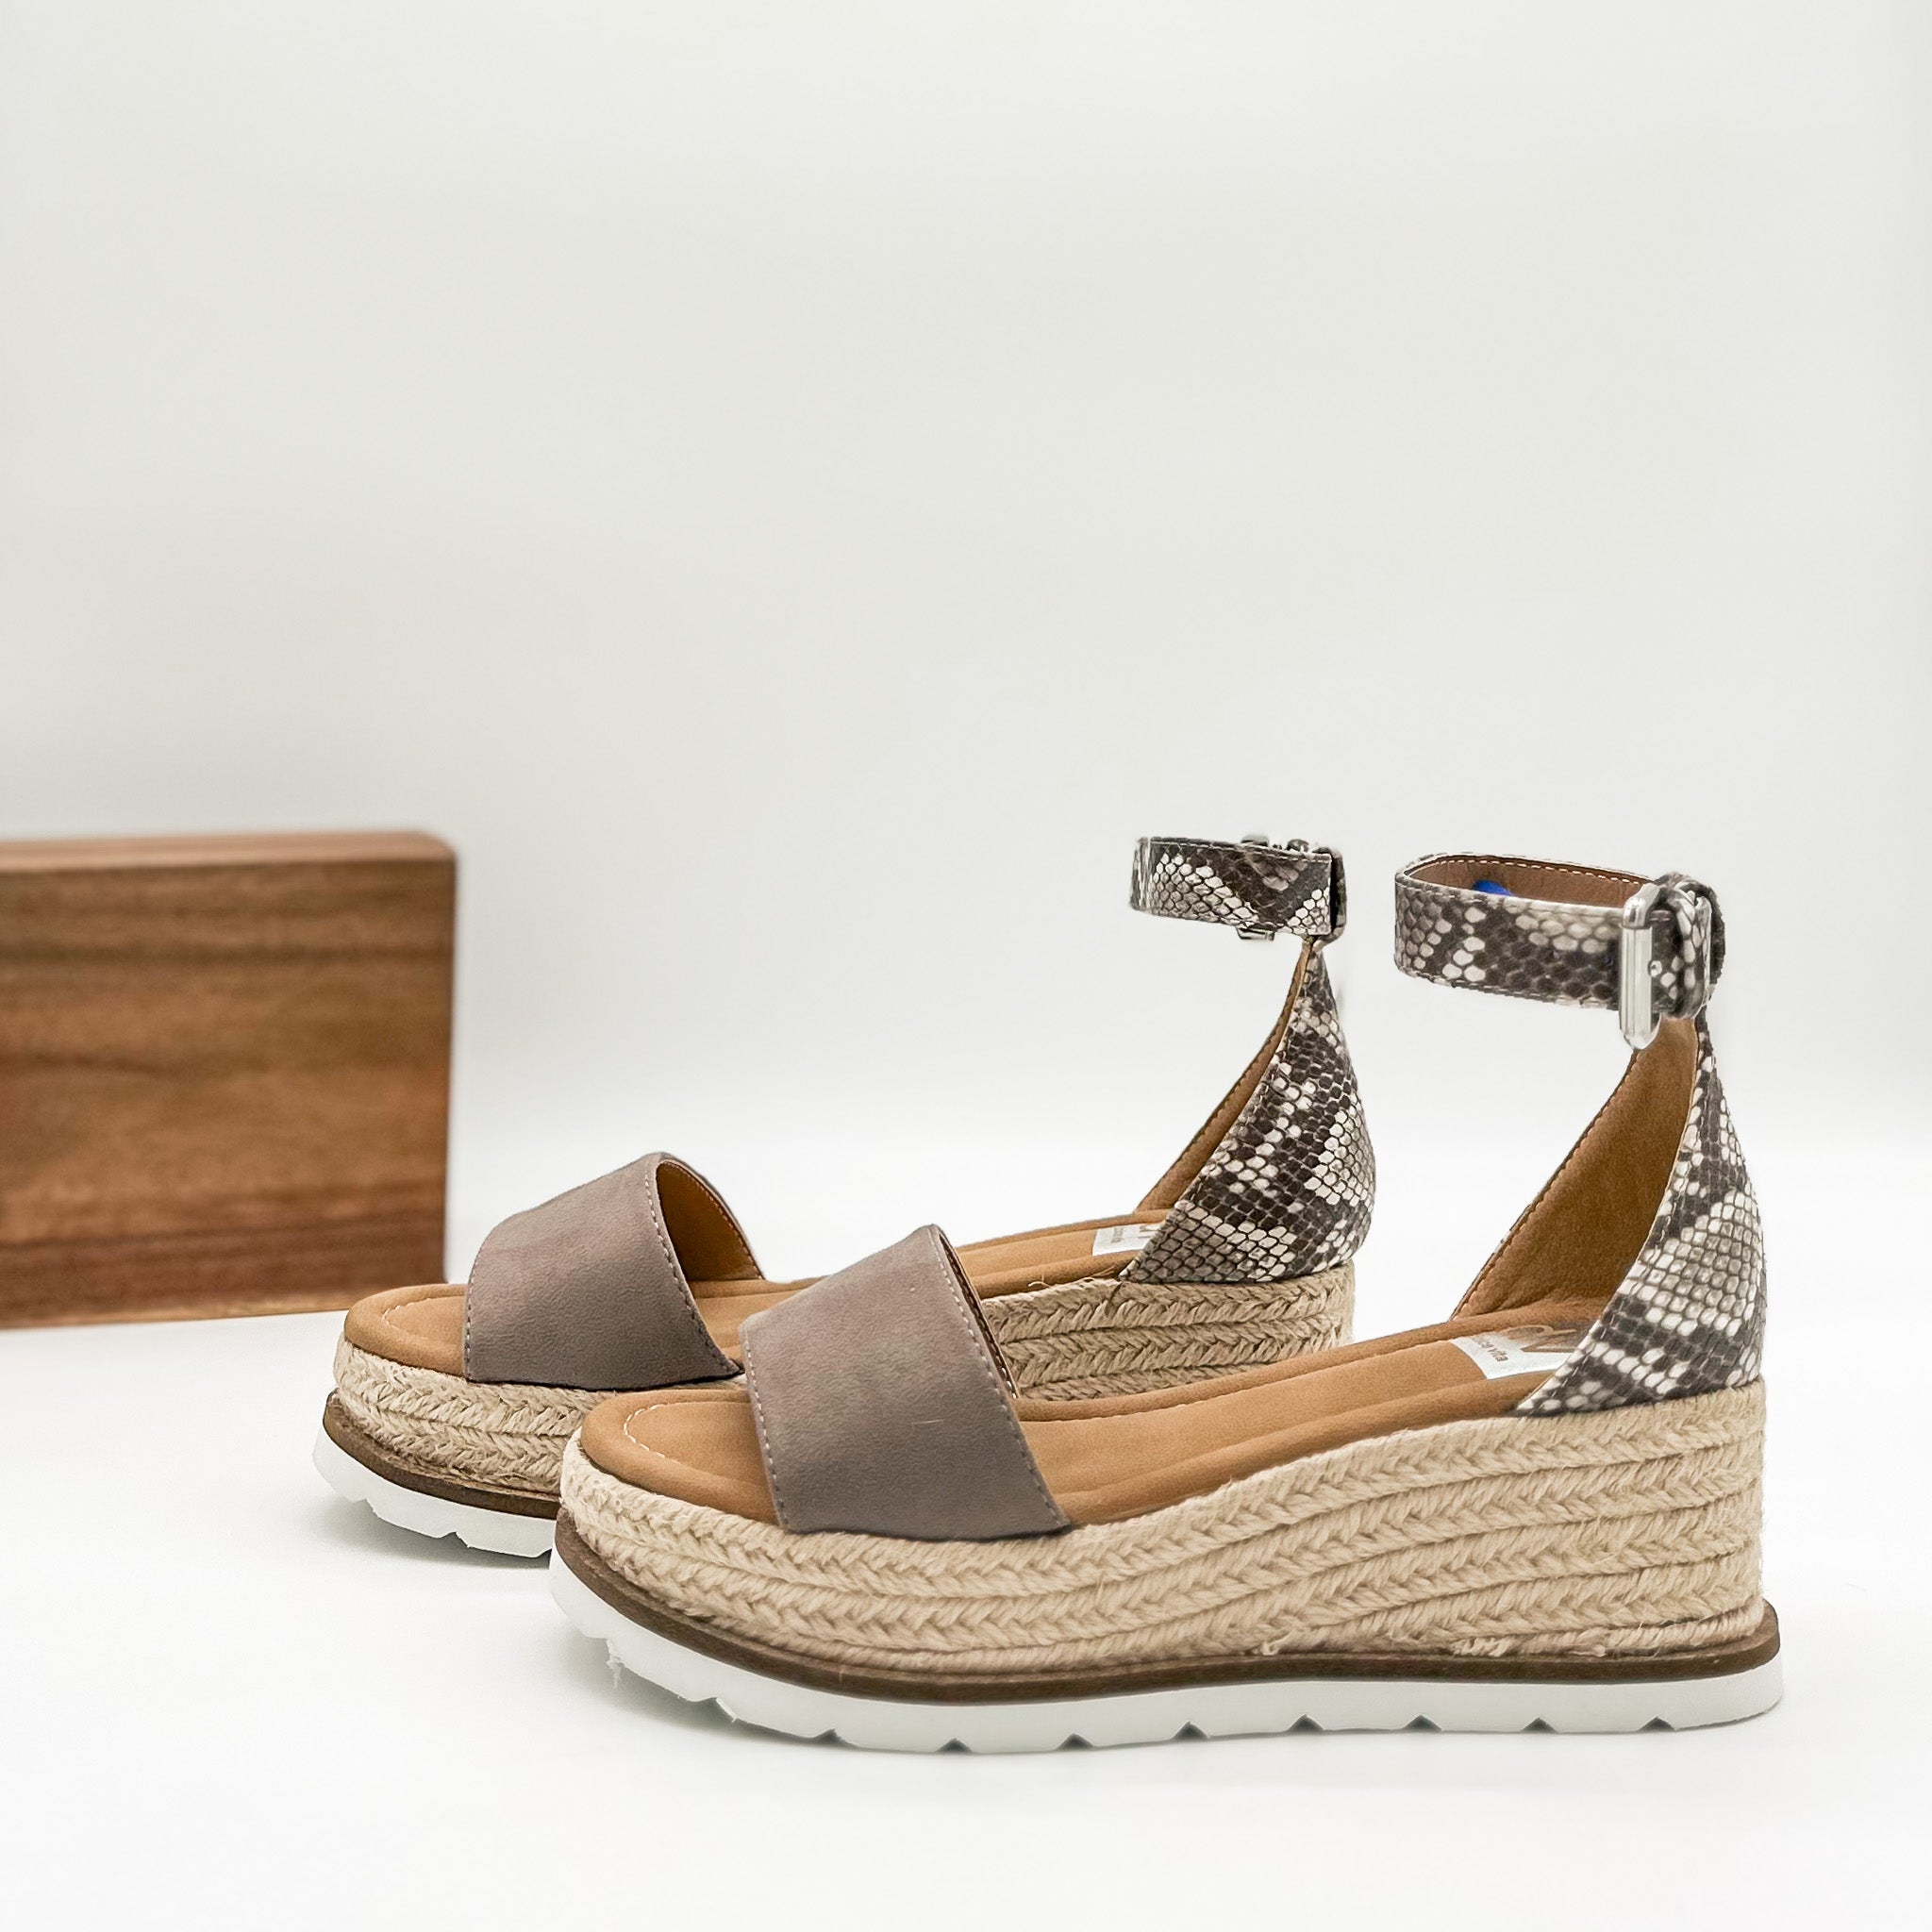 Dolce Vita Baker Wedge in Taupe